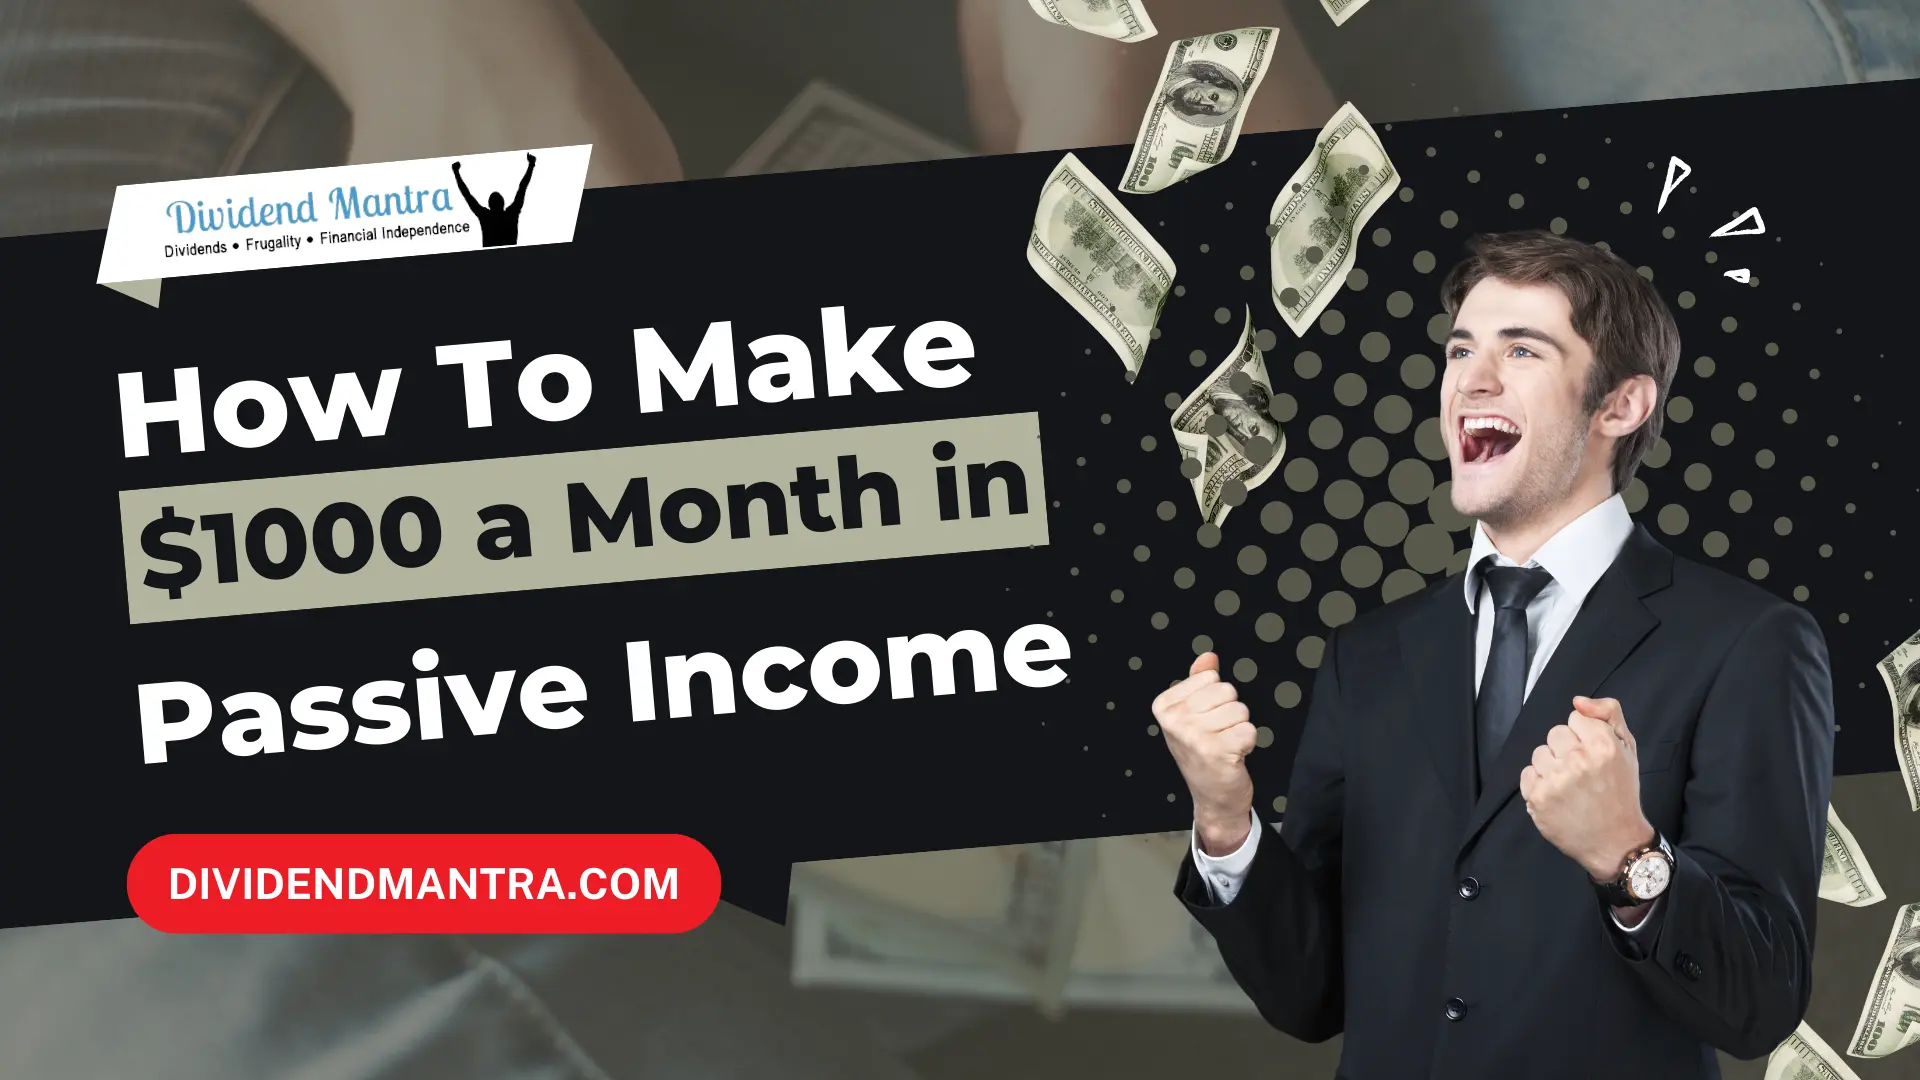 How To Make $1000 a Month in Passive Income